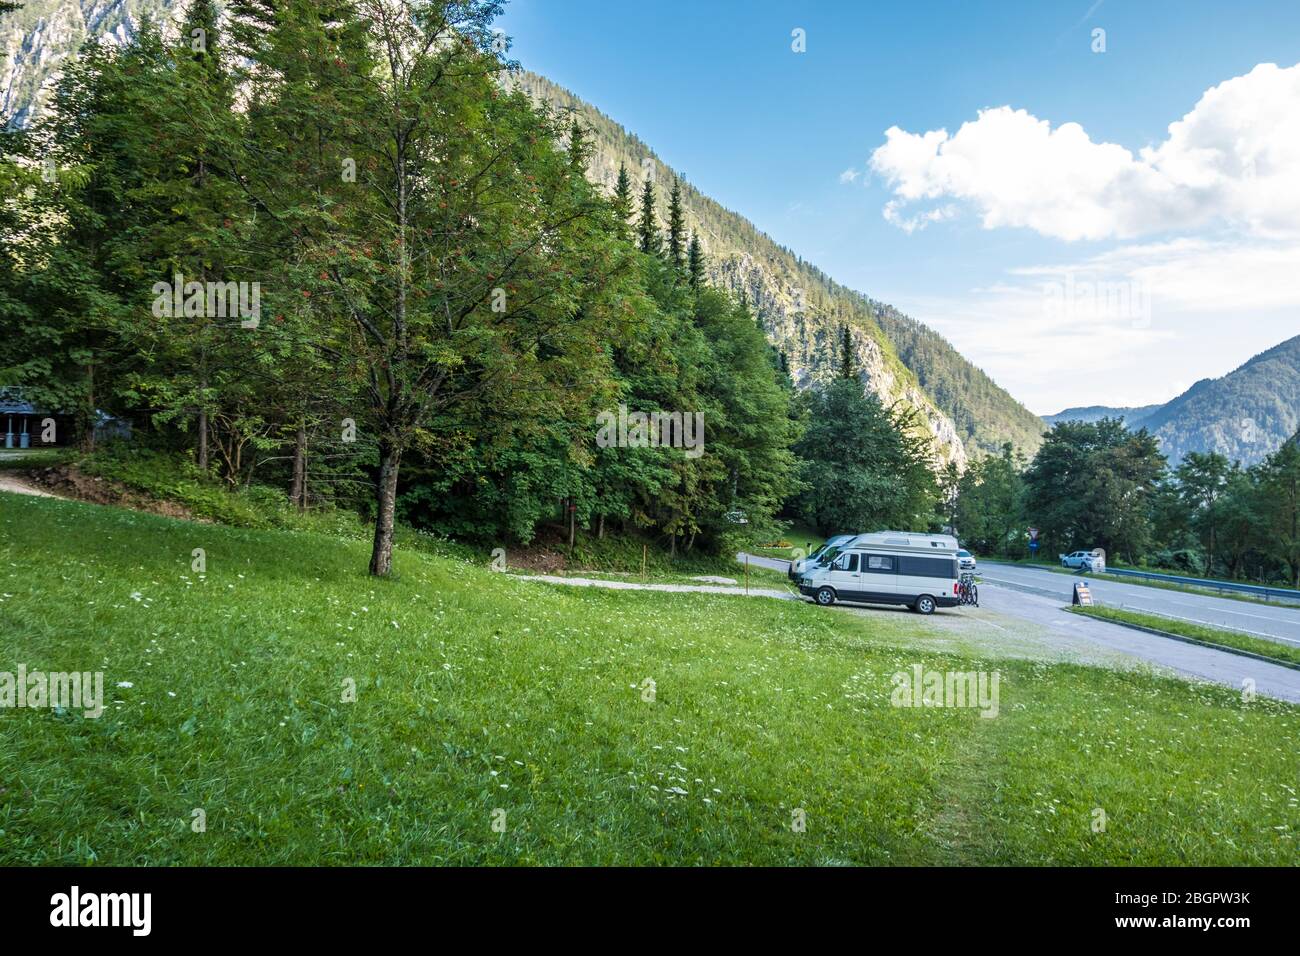 Ljubelj, Slovenia - August 09, 2019: Memorial park Mauthausen in St. Ana valley. Parking near Memorial and Remains of Camp Loibl in Slovenia Stock Photo